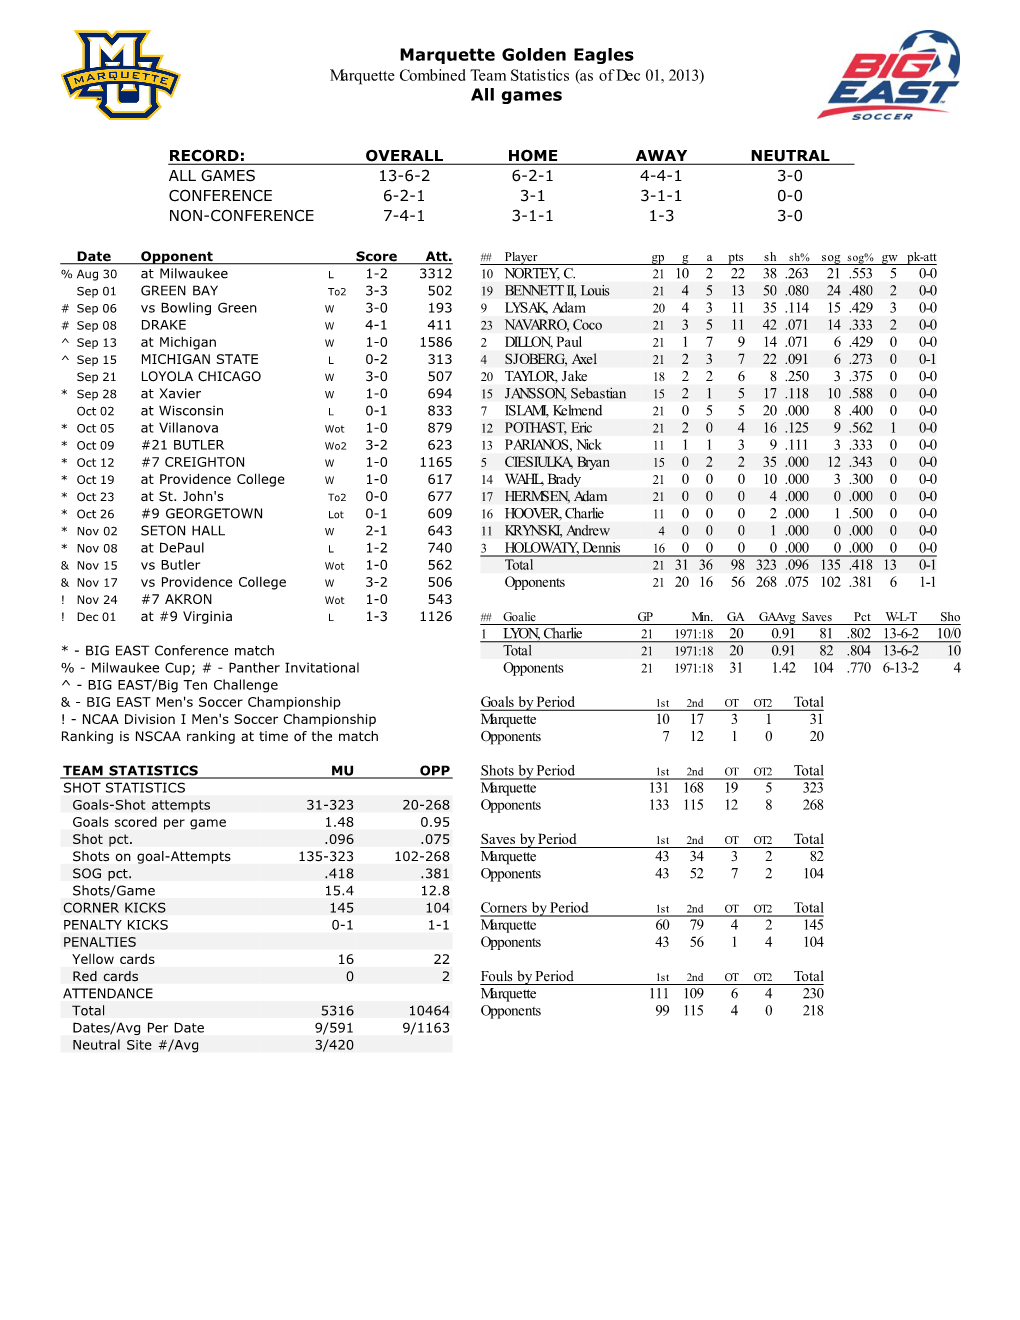 Marquette Golden Eagles Marquette Combined Team Statistics (As of Dec 01, 2013) All Games